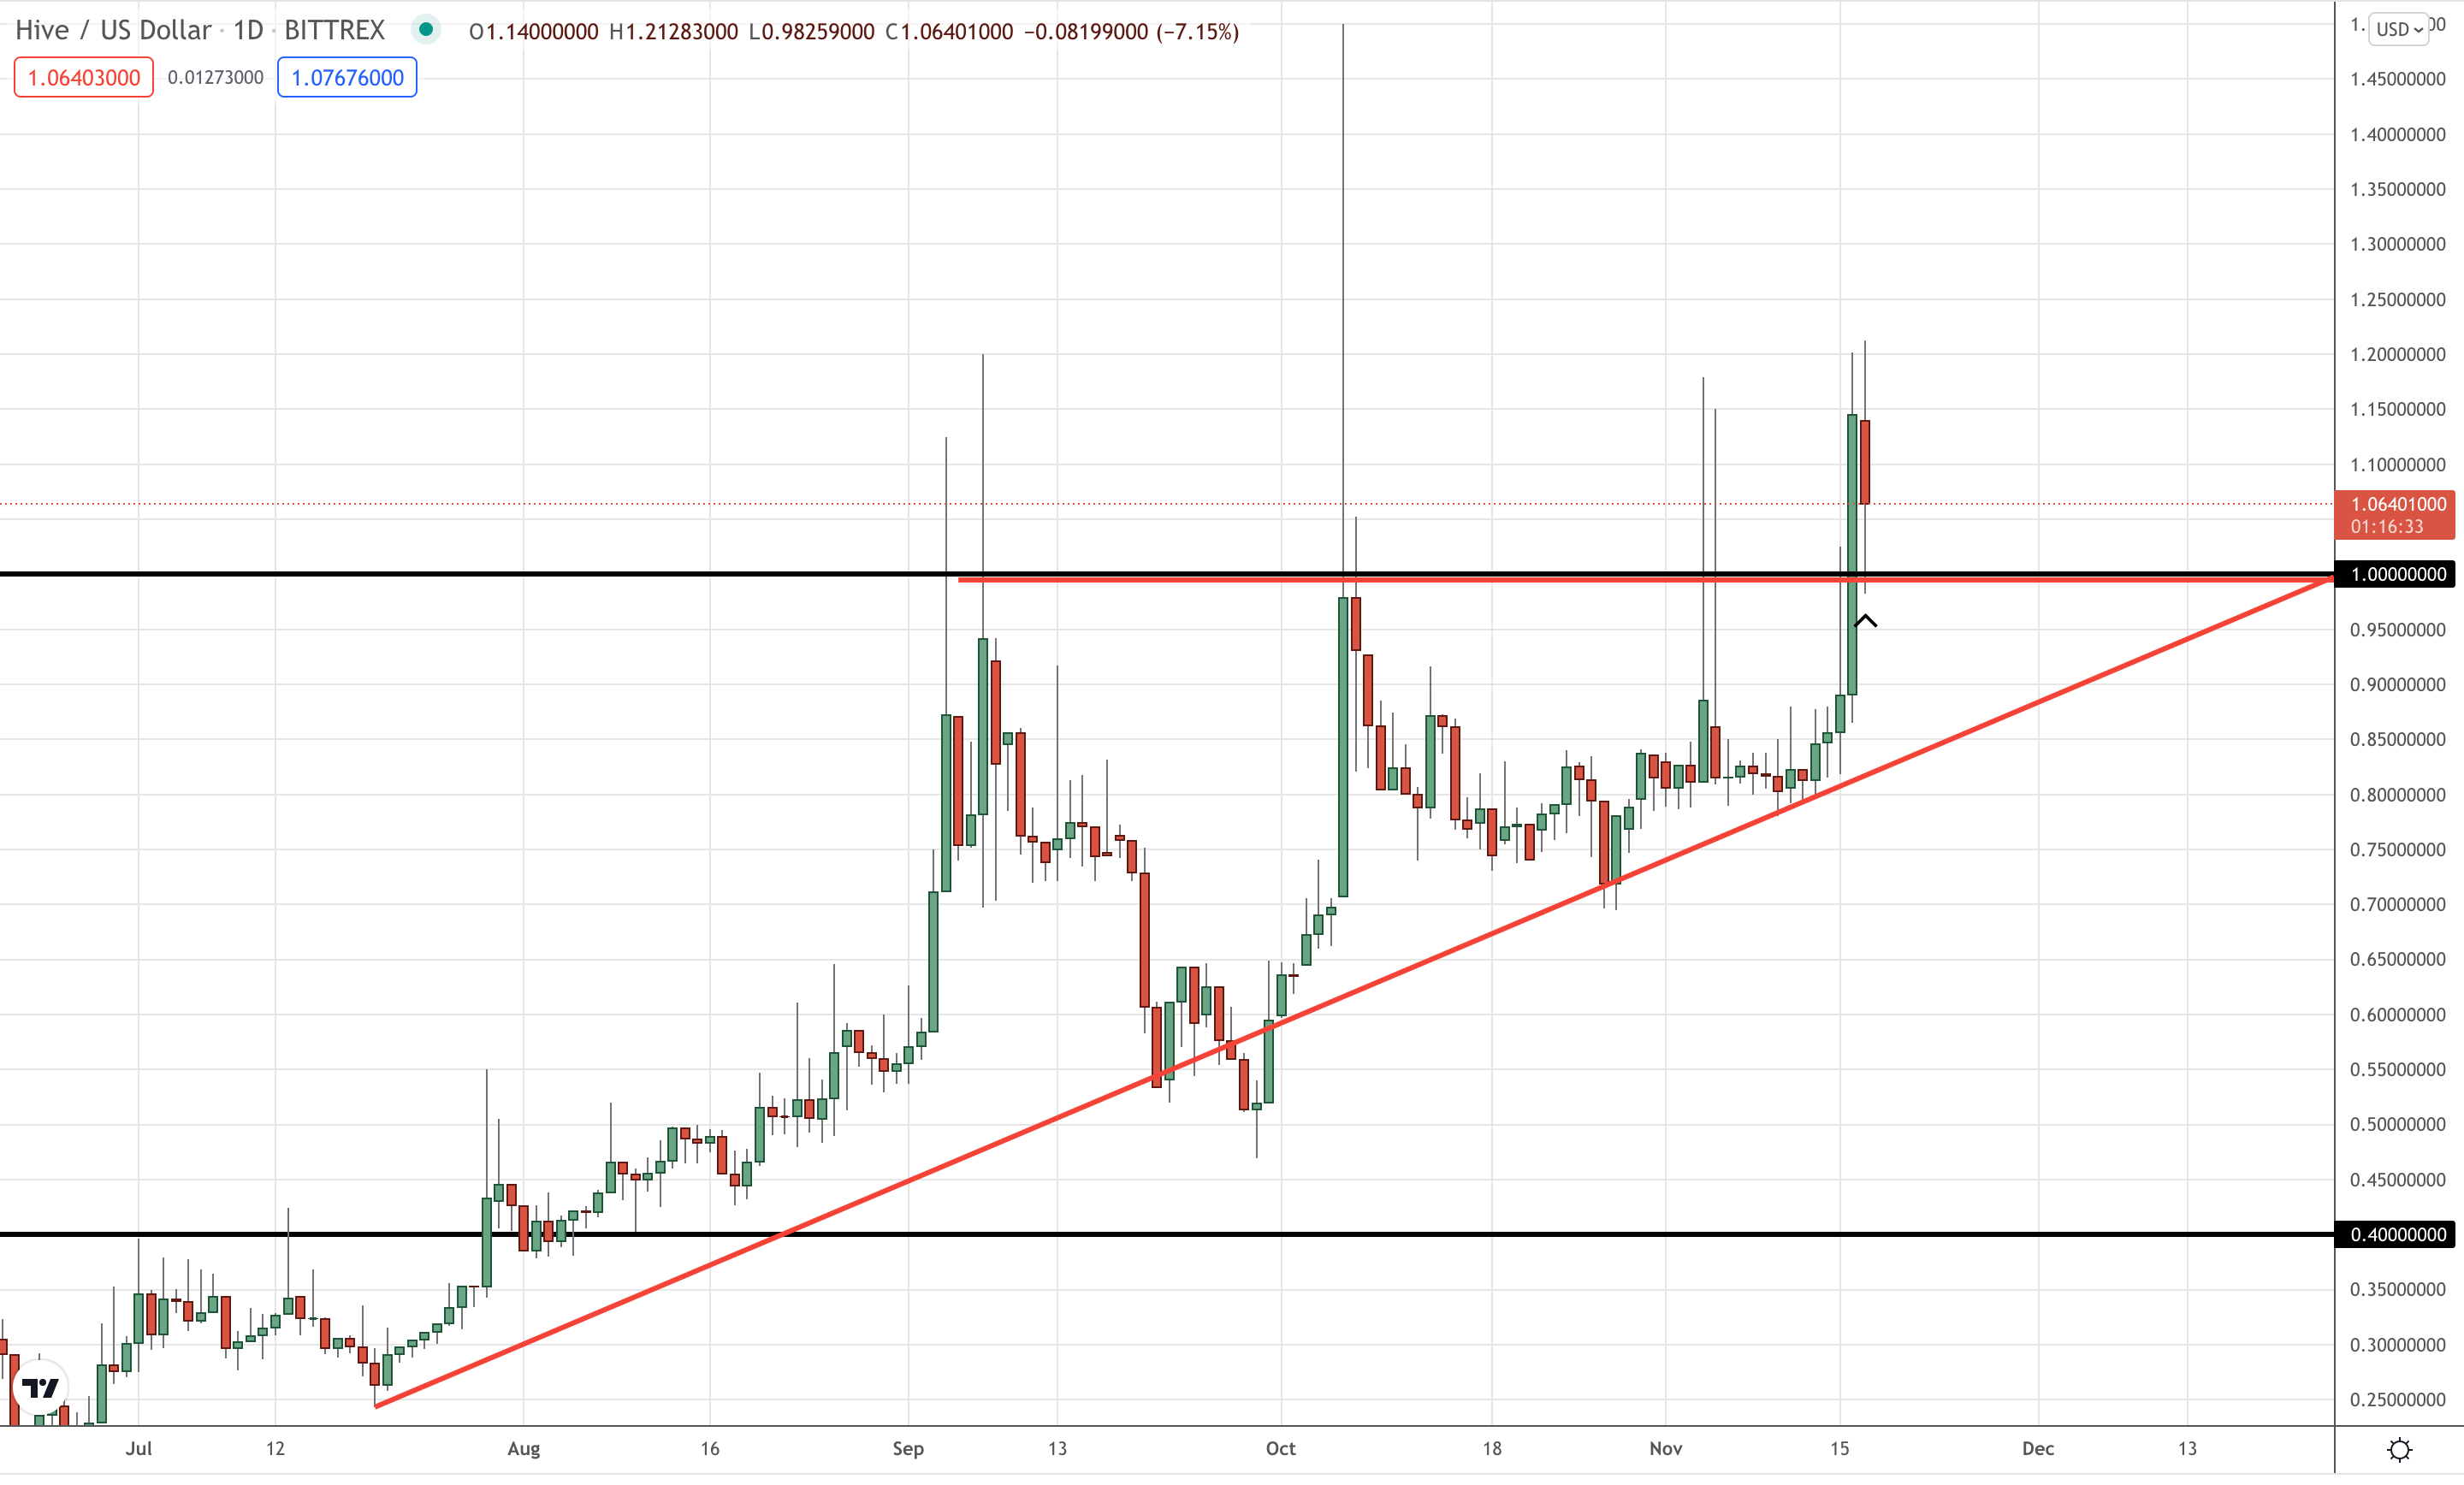 Hive crypto price update that shows a retest of broken resistance as support.